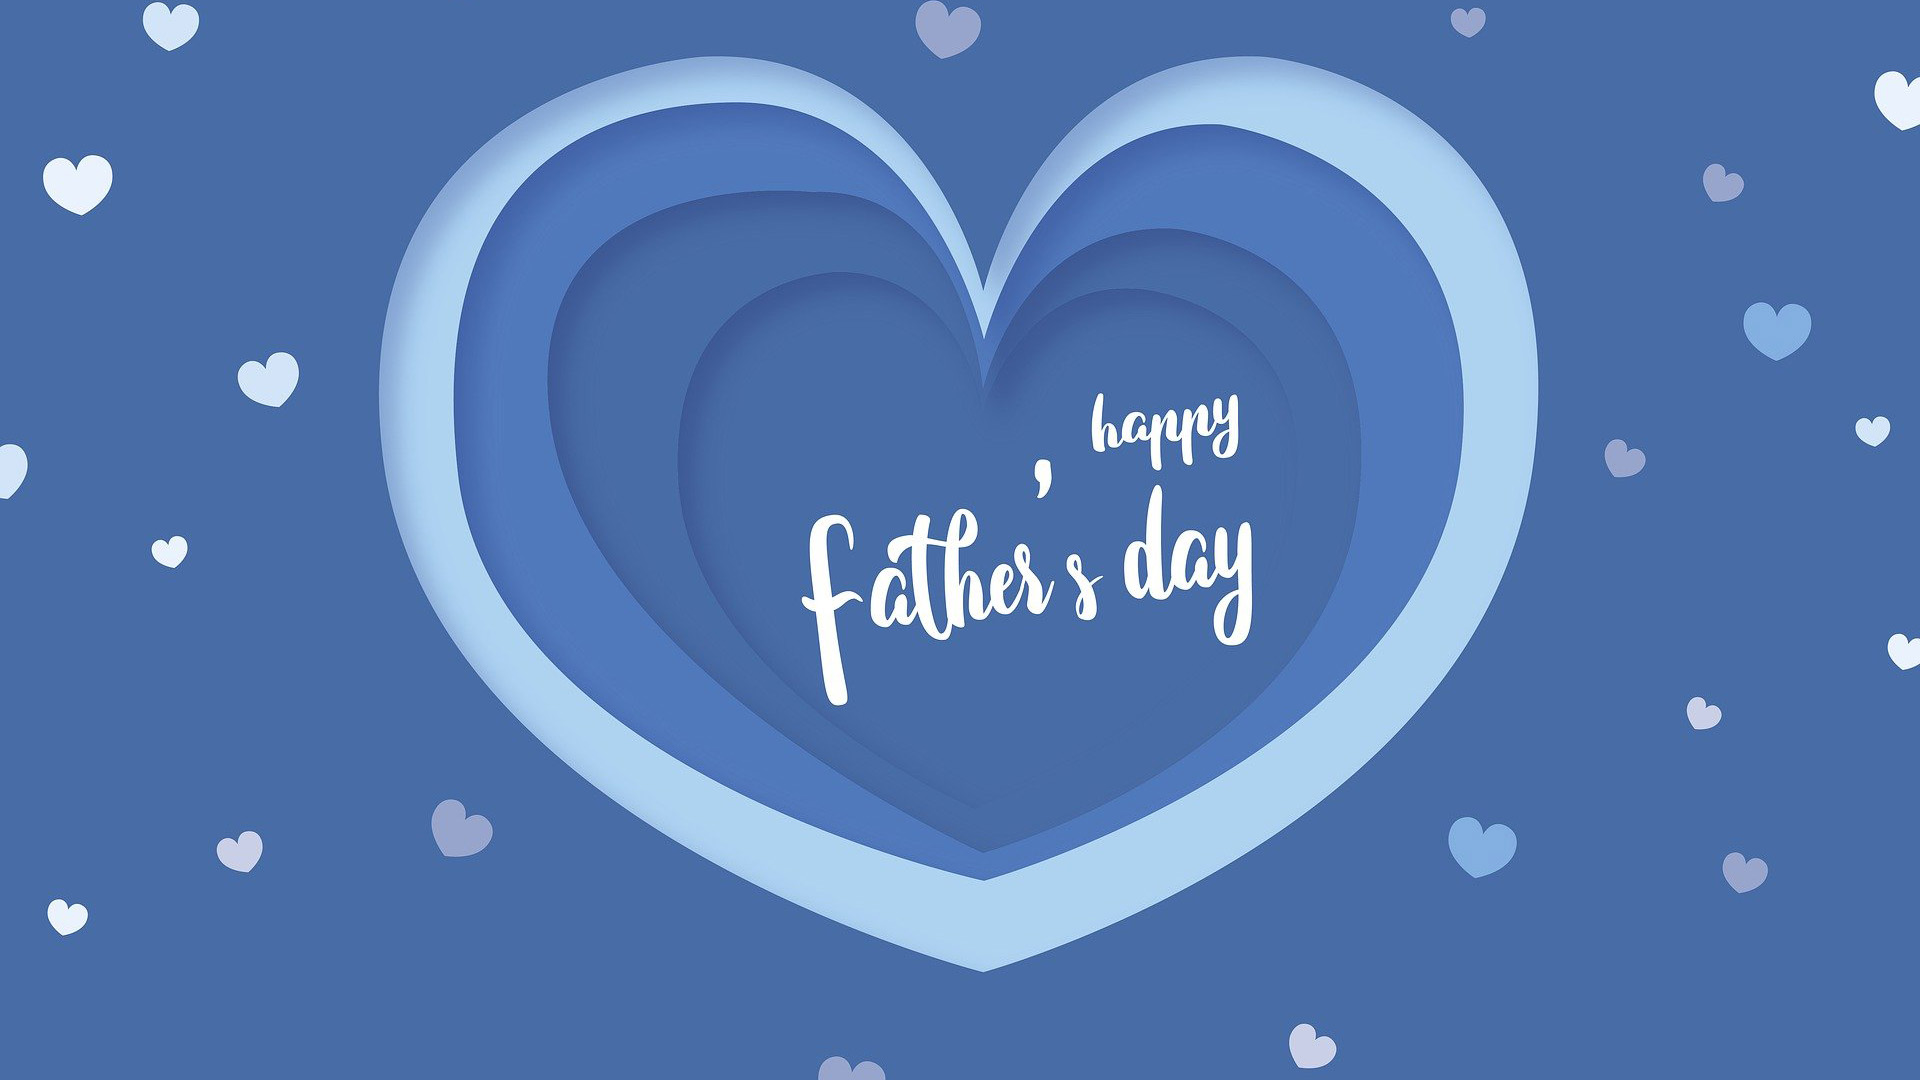 Blue background with little white and light blue hearts scattered across the background. In the center of the image there are multiple overlapping hearts. In the center of the heart it reads Happy Father's Day.